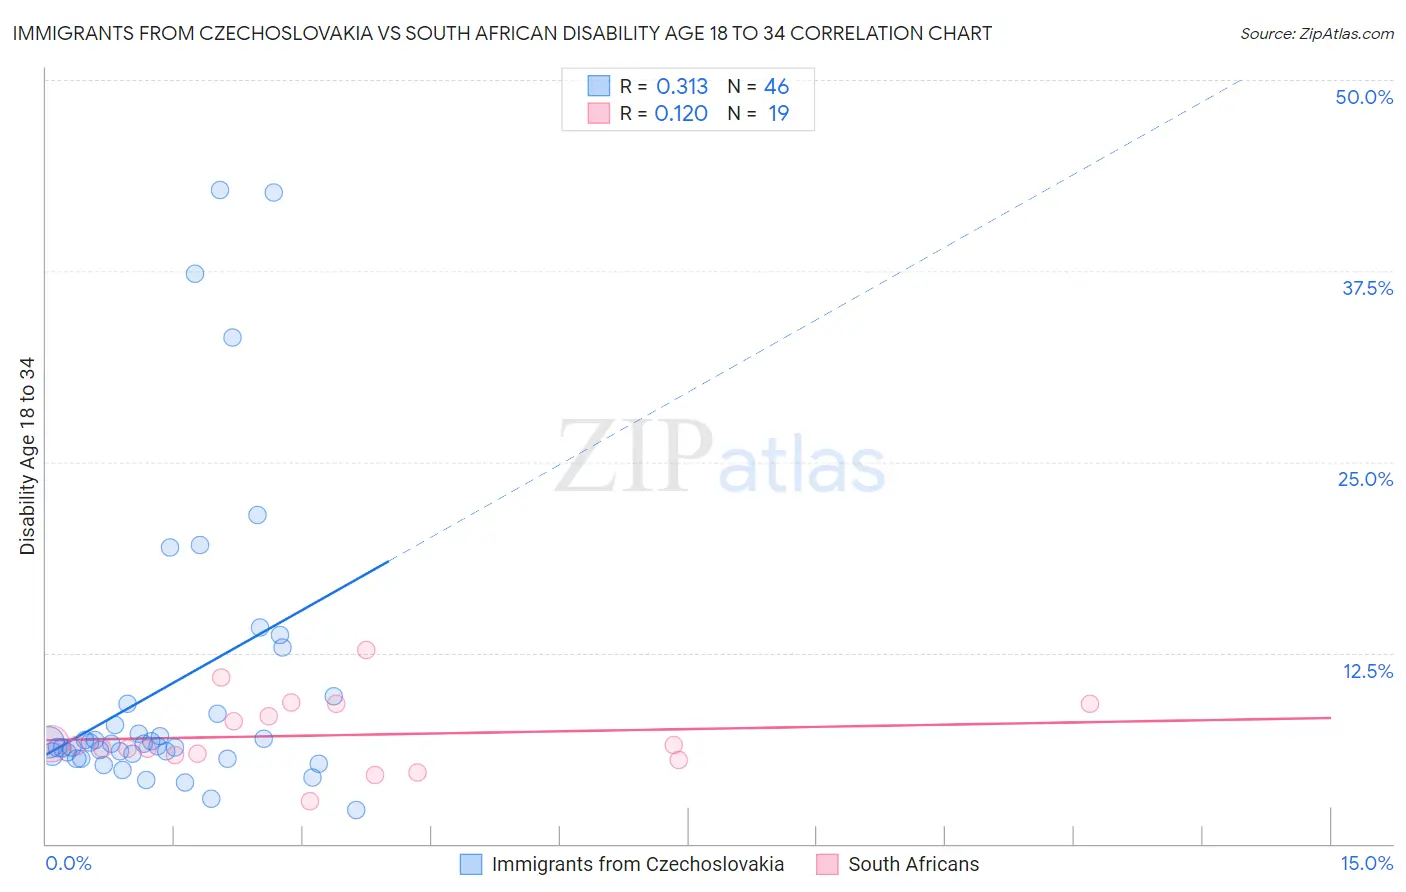 Immigrants from Czechoslovakia vs South African Disability Age 18 to 34